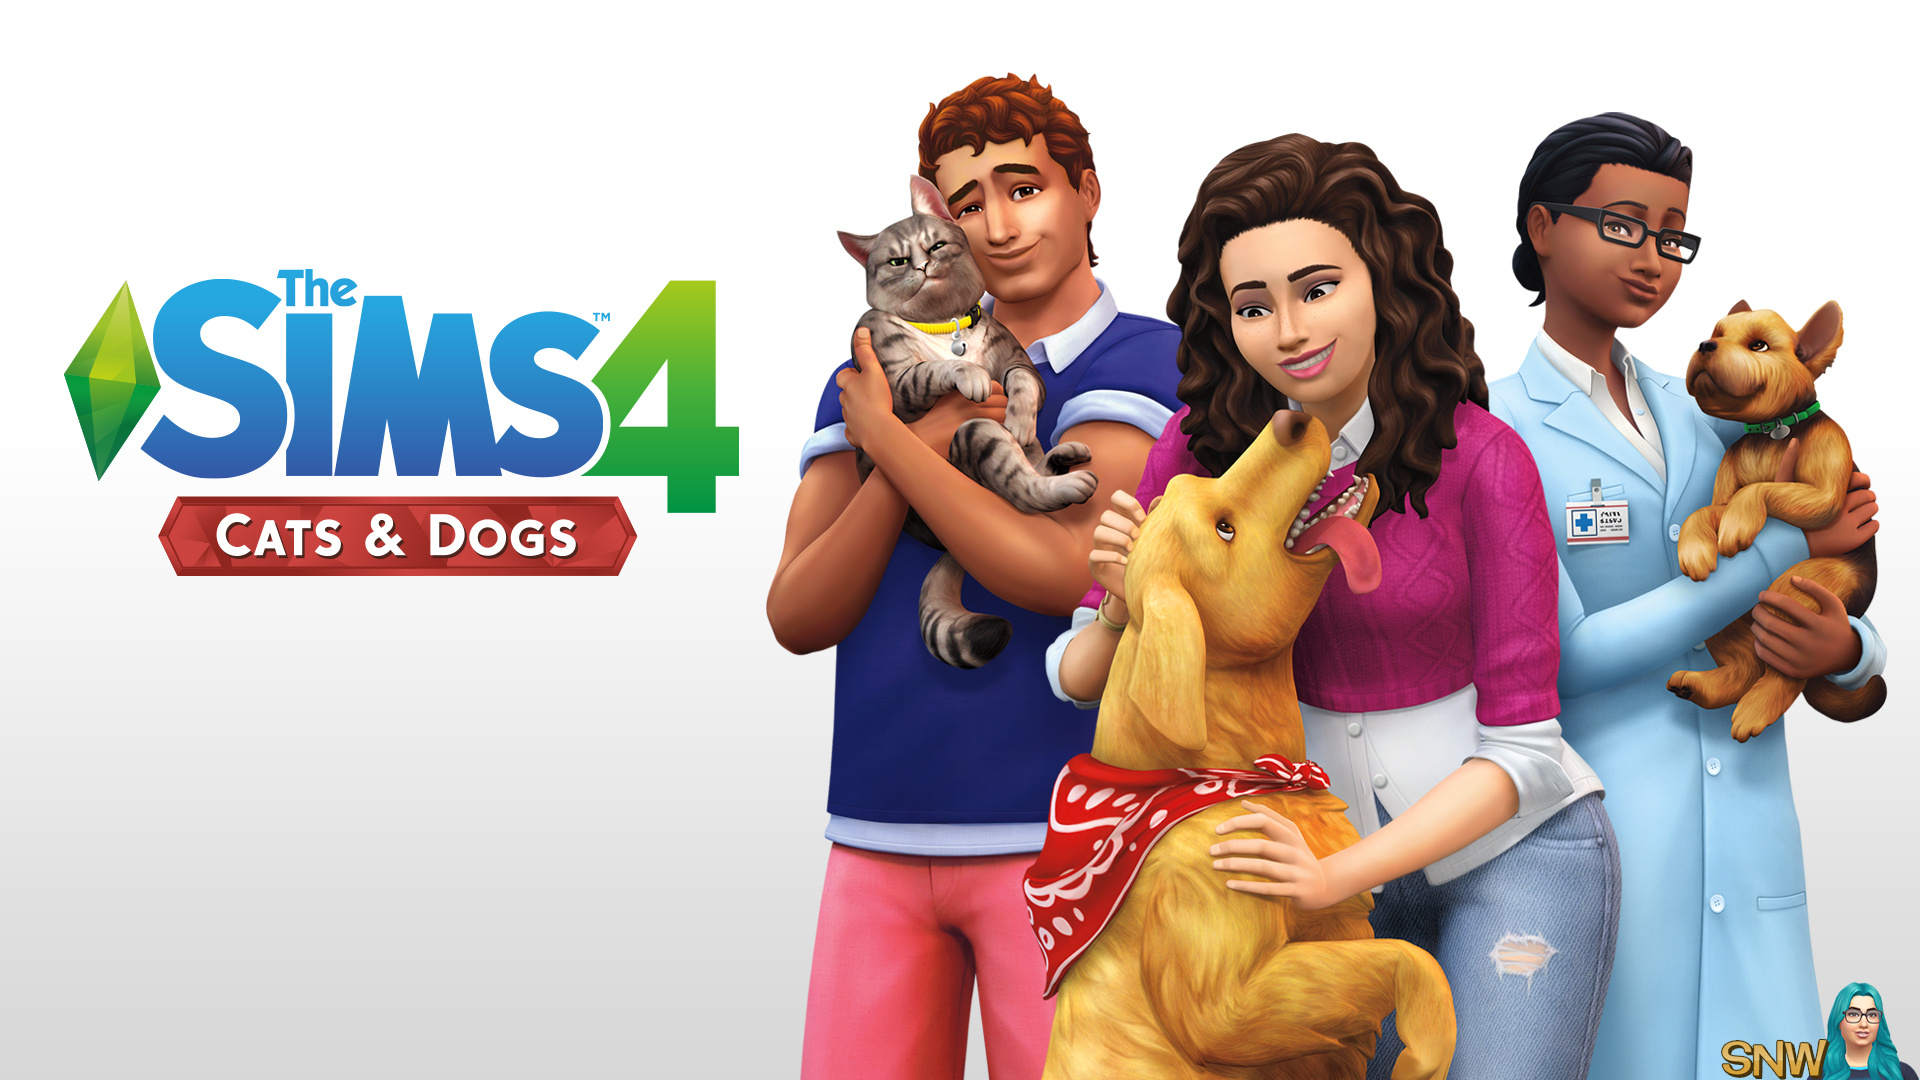 sims 4 cats and dogs promo code 2018